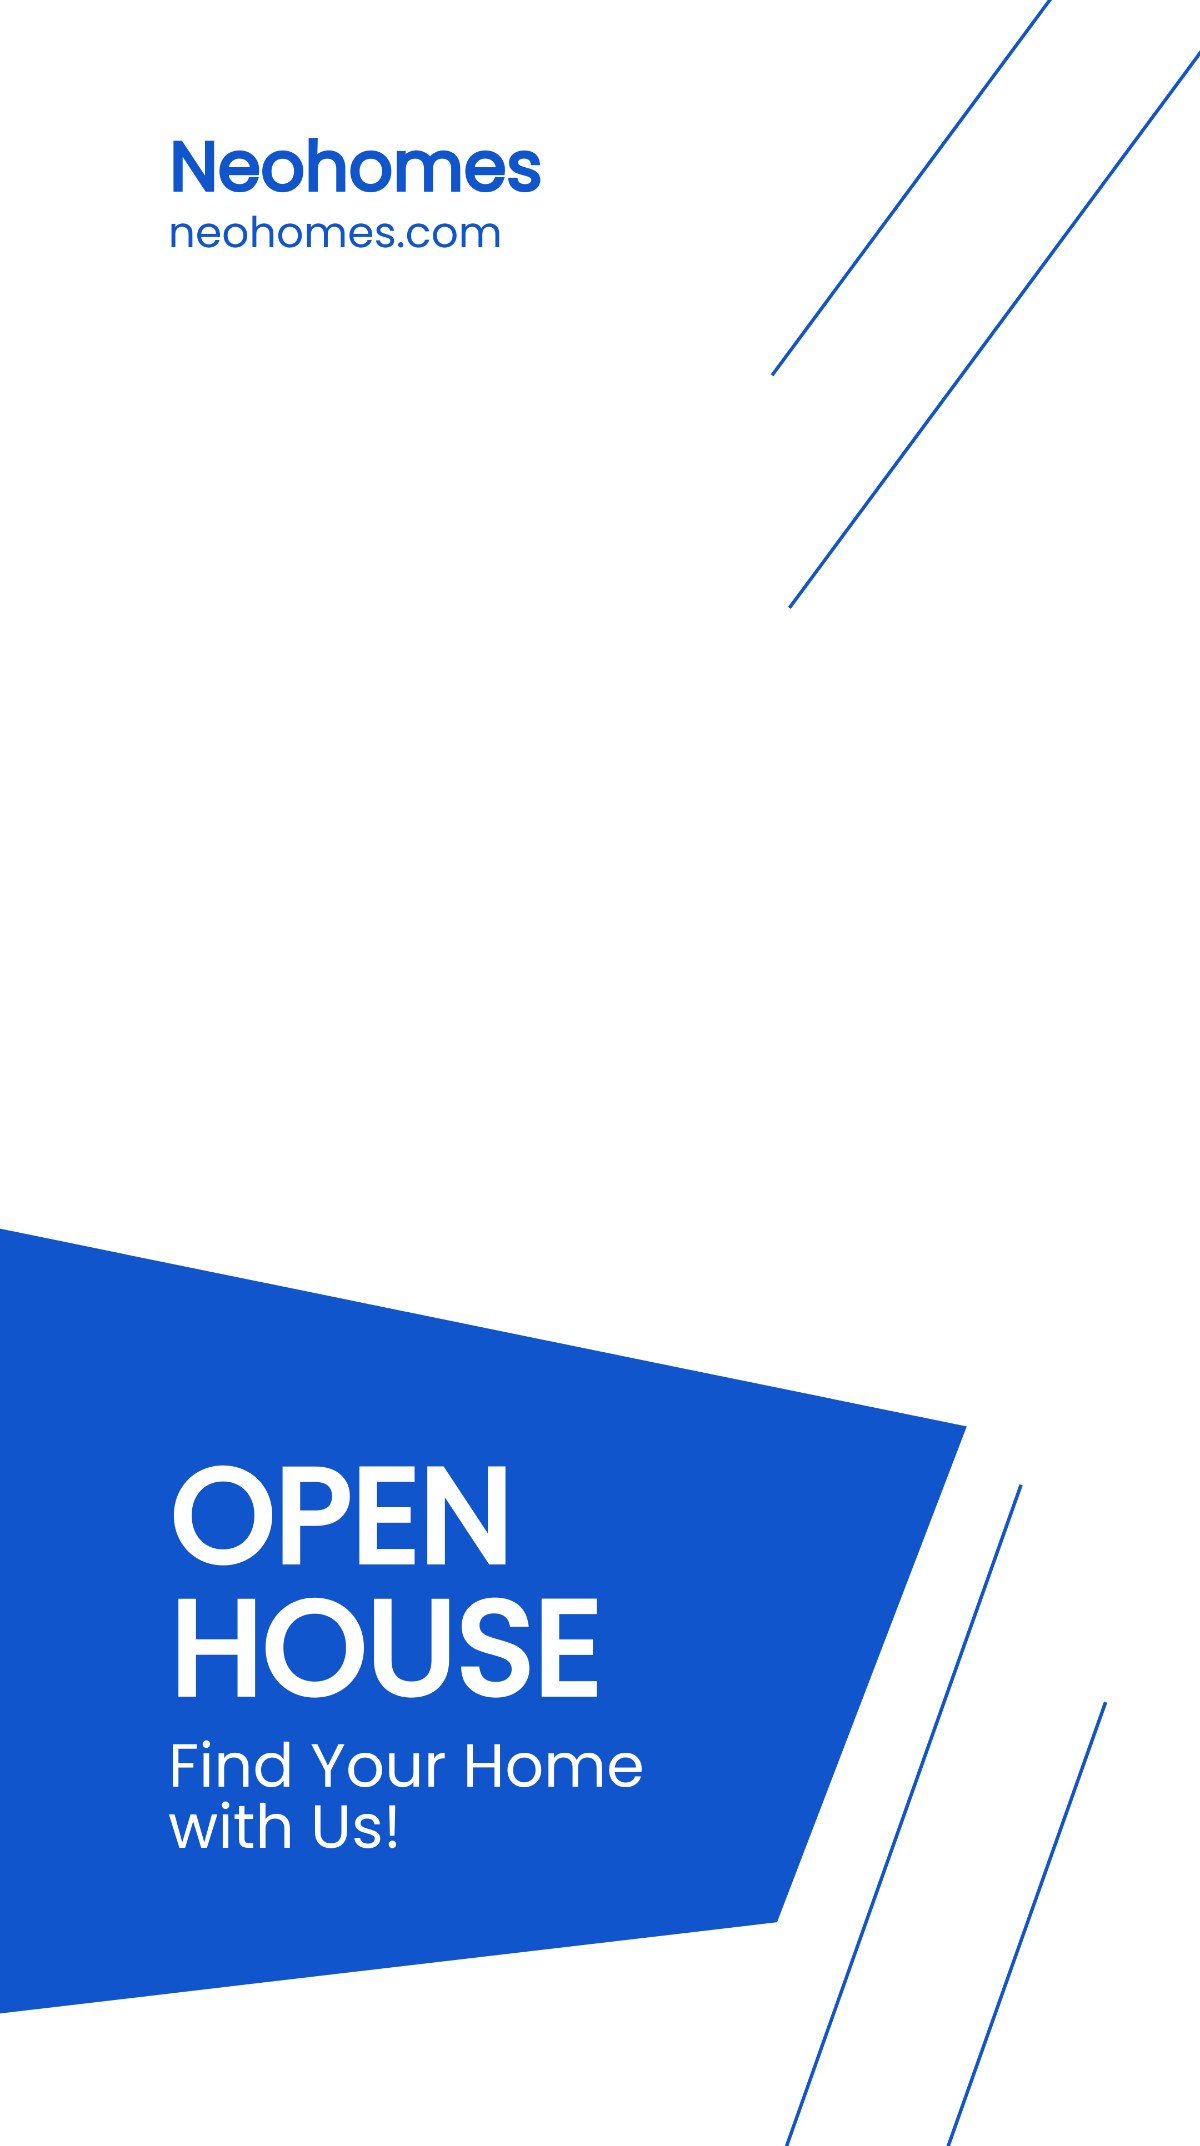 Free Open House Advertisement Snapchat Geofilter Template